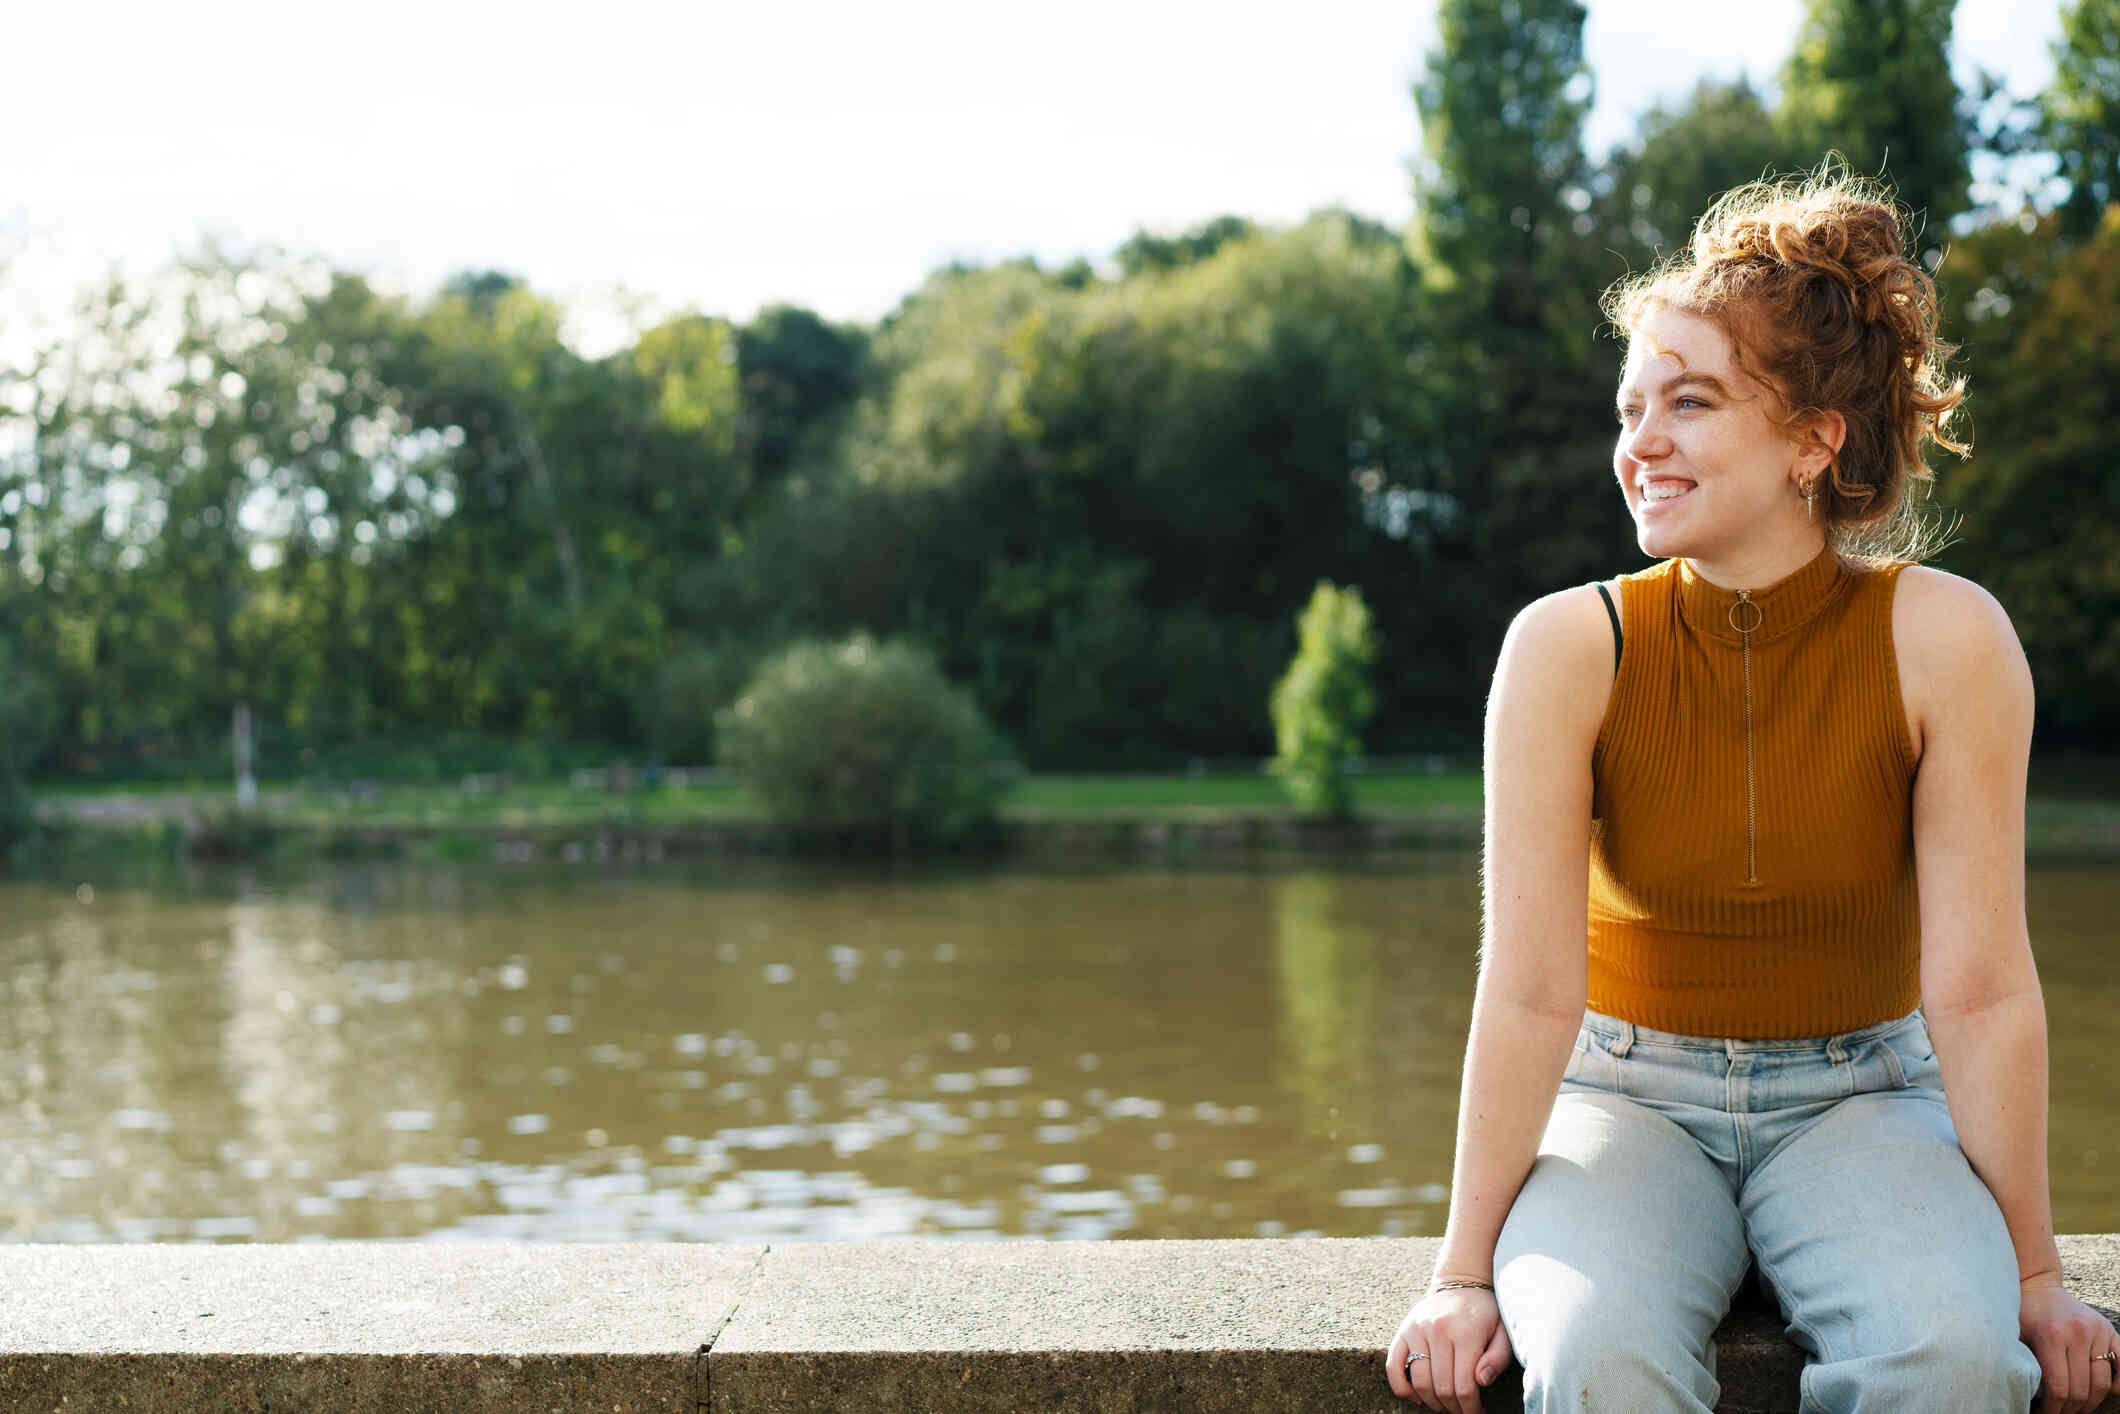 A woman in an orange top sits on a cement ledge outside near a river and smiles while gazing off.